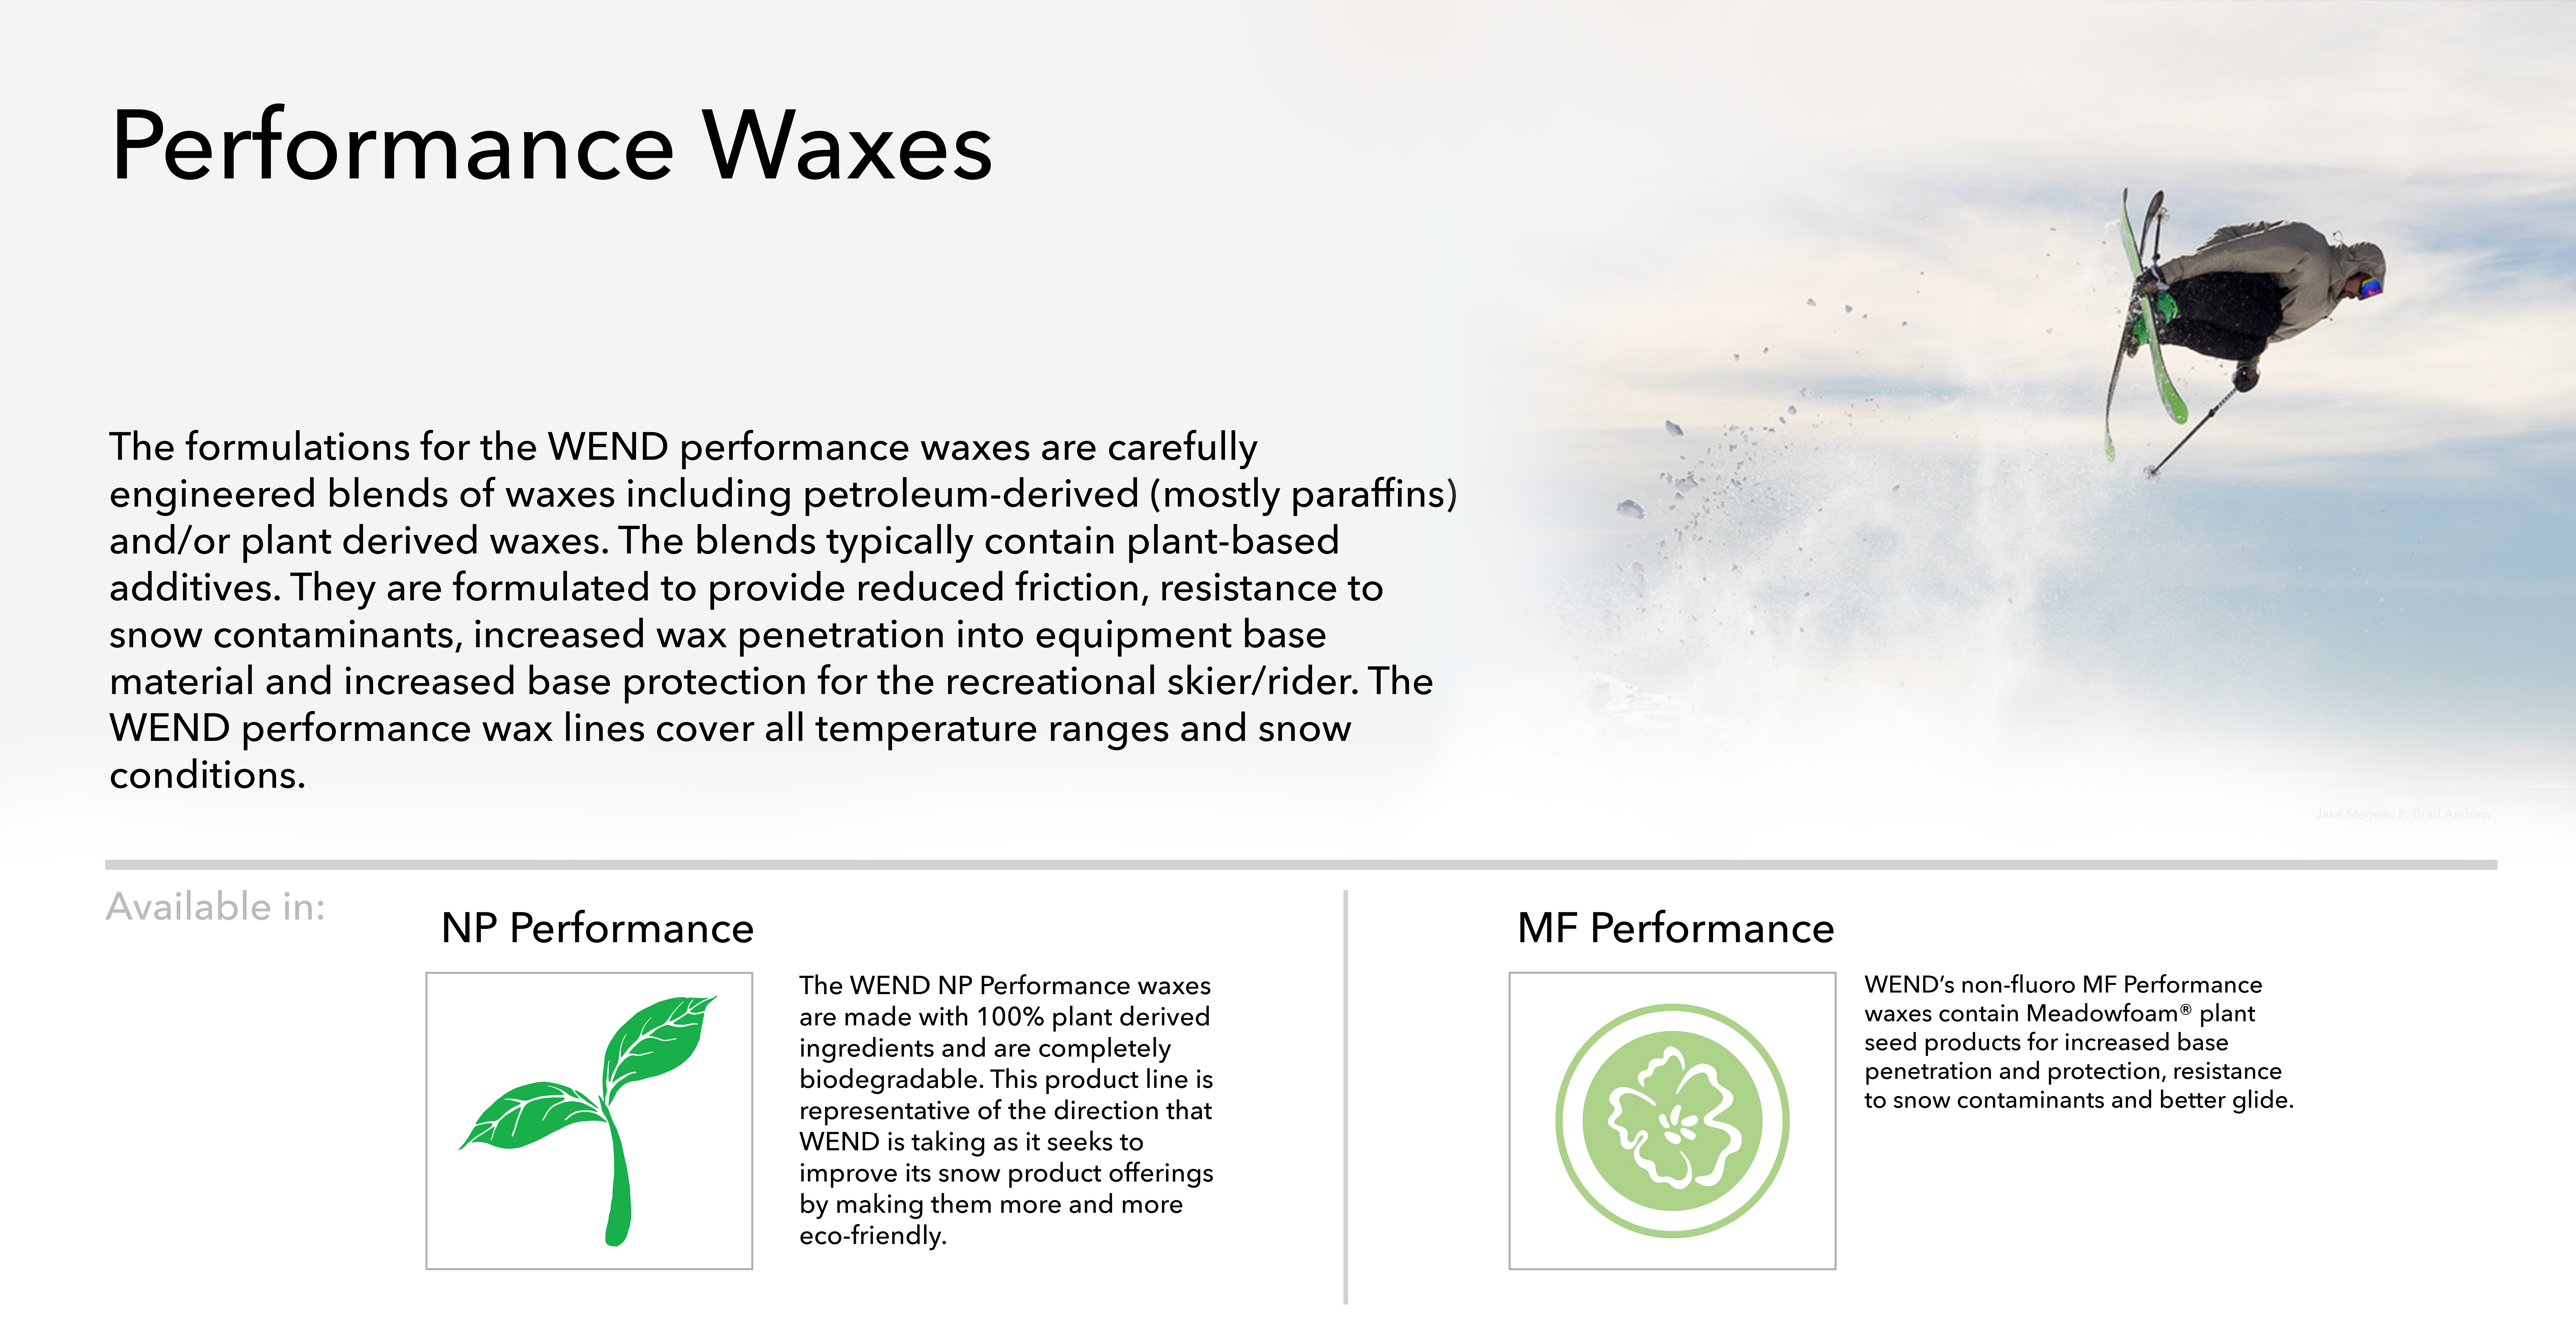 Performance Waxes. The formulations for the WEND performance waxes are carefully engineered blends of waxes including petroleum-derived (mostly paraffins) and/or plant derived waxes. The blends typically contain plant-based additives. They are formulated to provide reduced friction, resistance to snow contaminants, increased wax penetration into equipment base material and increased base protection for the recreational skier/rider. The WEND performance wax lines cover all temperature ranges and snow conditions. The WEND NP Performance waxes are made with 100% plant derived ingredients and are completely biodegradable. This product line is representative of the direction that WEND is taking as it seeks to improve its snow product offerings by making them more and more eco-friendly.  WEND’s non-fluoro MF Performance waxes contain Meadowfoam® plant seed products for increased base penetration and protection, resistance to snow contaminants and better glide. 